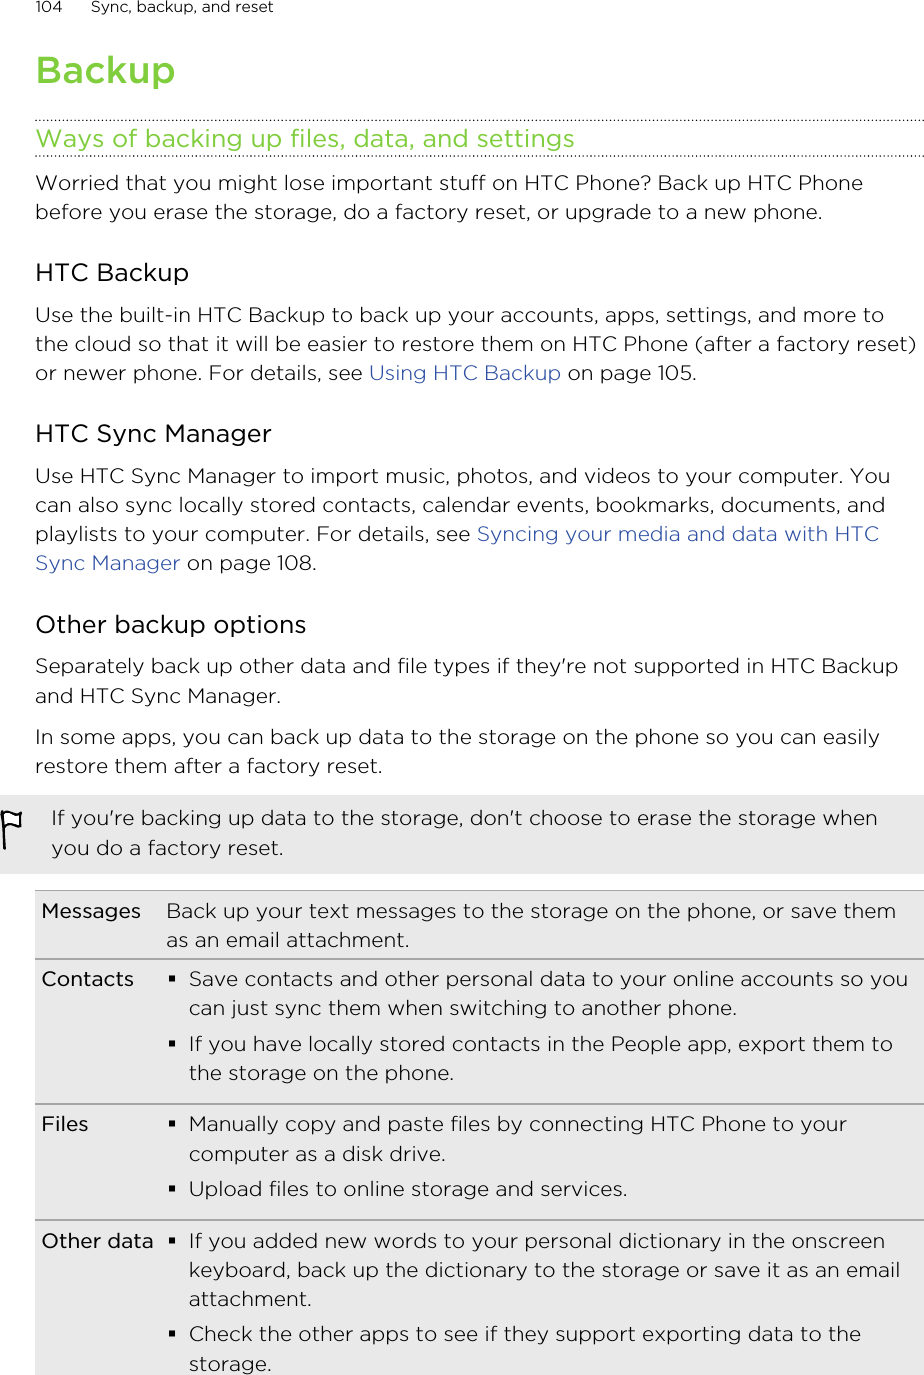 BackupWays of backing up files, data, and settingsWorried that you might lose important stuff on HTC Phone? Back up HTC Phonebefore you erase the storage, do a factory reset, or upgrade to a new phone.HTC BackupUse the built-in HTC Backup to back up your accounts, apps, settings, and more tothe cloud so that it will be easier to restore them on HTC Phone (after a factory reset)or newer phone. For details, see Using HTC Backup on page 105.HTC Sync ManagerUse HTC Sync Manager to import music, photos, and videos to your computer. Youcan also sync locally stored contacts, calendar events, bookmarks, documents, andplaylists to your computer. For details, see Syncing your media and data with HTCSync Manager on page 108.Other backup optionsSeparately back up other data and file types if they&apos;re not supported in HTC Backupand HTC Sync Manager.In some apps, you can back up data to the storage on the phone so you can easilyrestore them after a factory reset.If you&apos;re backing up data to the storage, don&apos;t choose to erase the storage whenyou do a factory reset.Messages Back up your text messages to the storage on the phone, or save themas an email attachment.Contacts §Save contacts and other personal data to your online accounts so youcan just sync them when switching to another phone.§If you have locally stored contacts in the People app, export them tothe storage on the phone.Files §Manually copy and paste files by connecting HTC Phone to yourcomputer as a disk drive.§Upload files to online storage and services.Other data §If you added new words to your personal dictionary in the onscreenkeyboard, back up the dictionary to the storage or save it as an emailattachment.§Check the other apps to see if they support exporting data to thestorage.104 Sync, backup, and resetHTC Confidential for Certification HTC Confidential for Certification